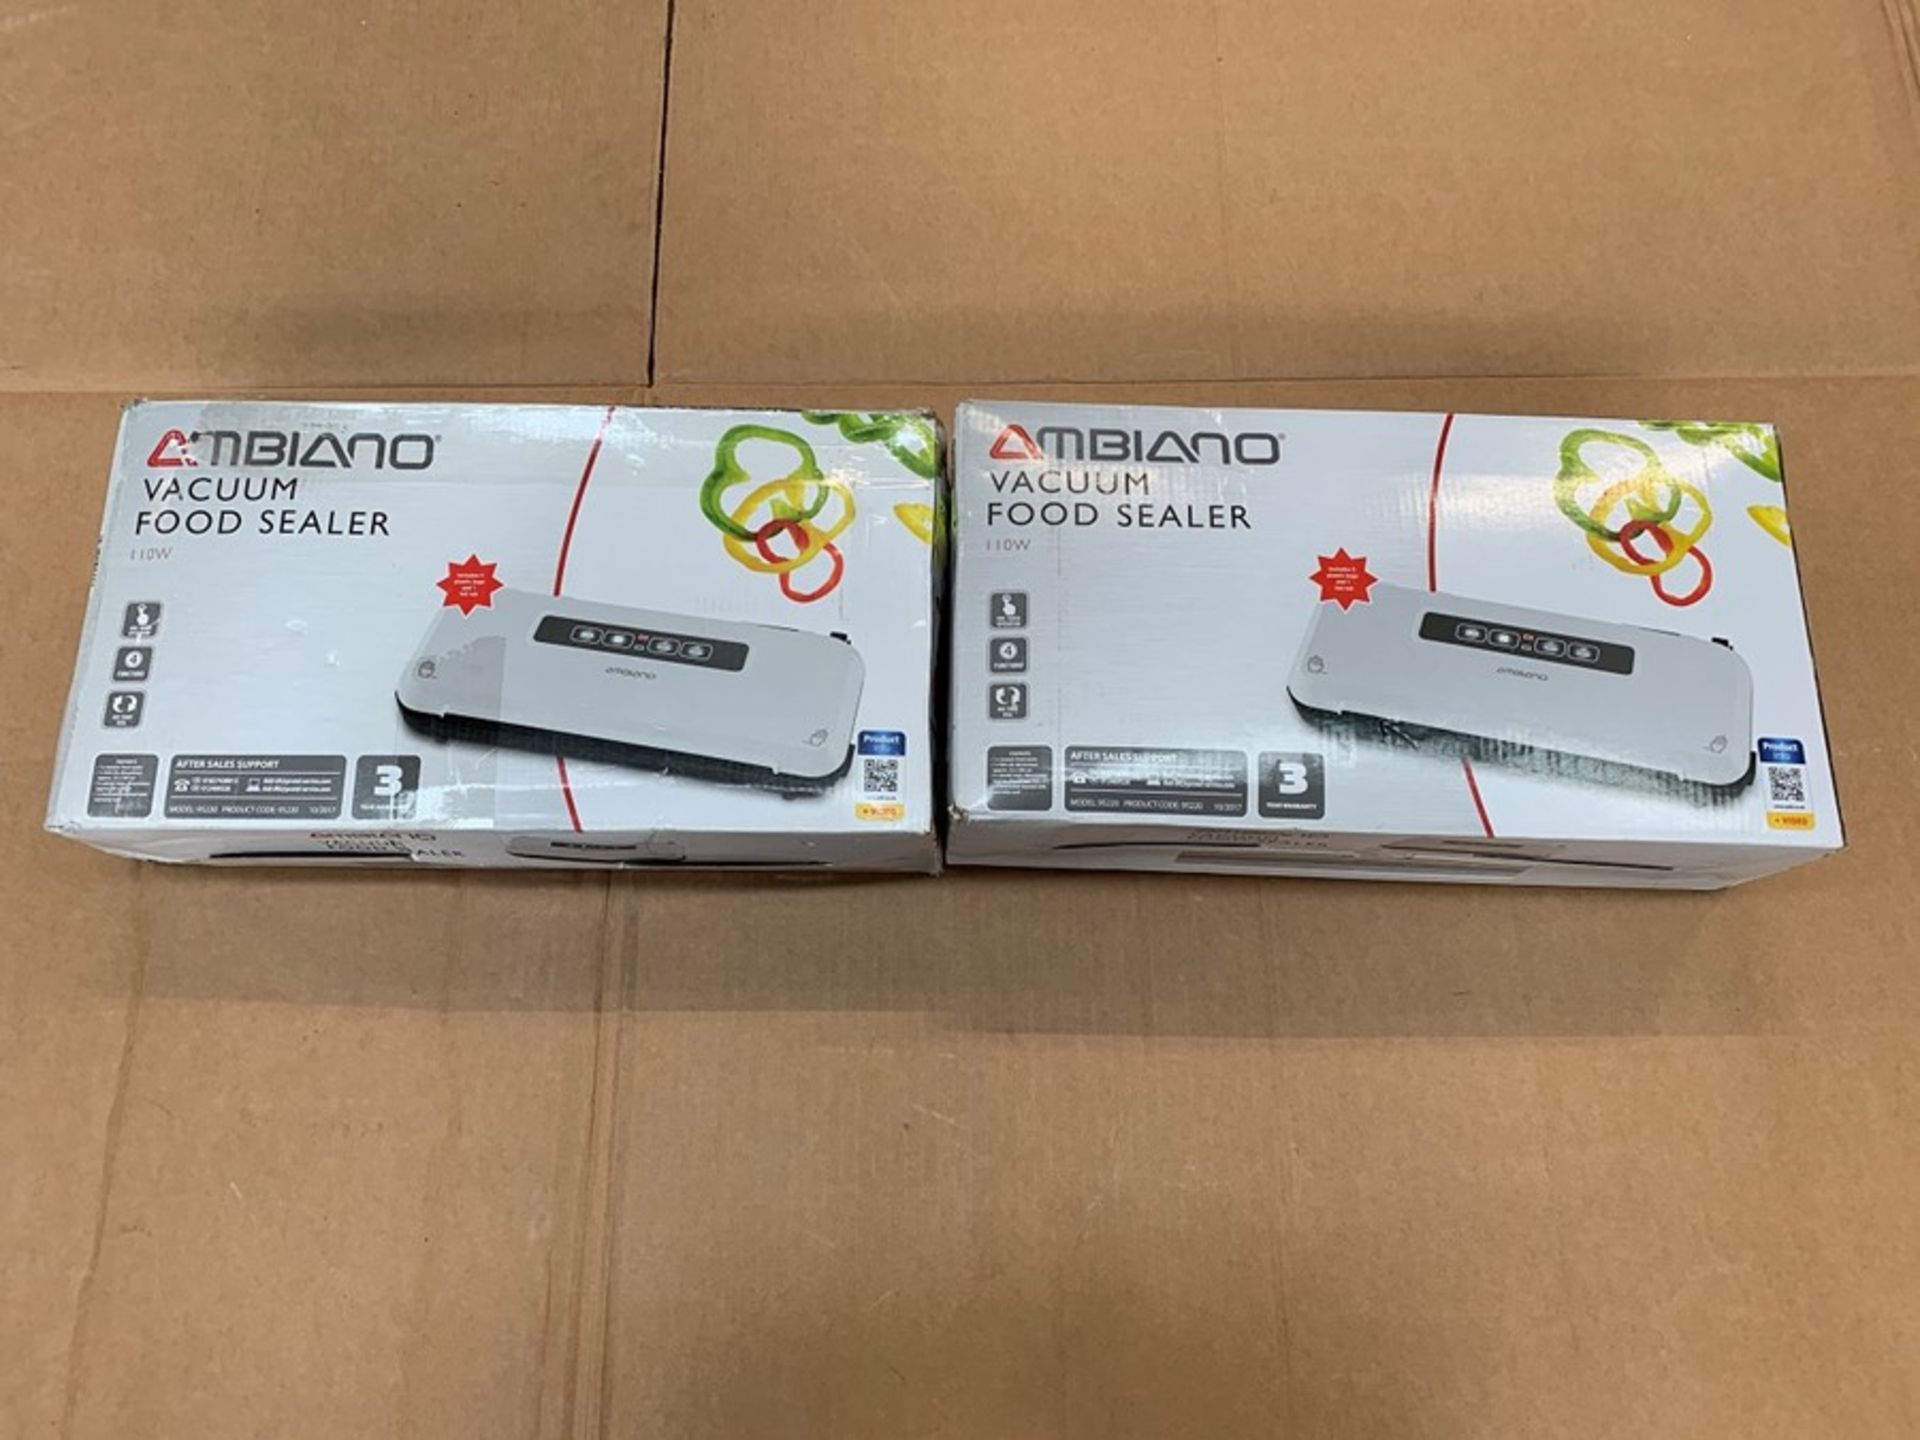 1 LOT TO CONTAIN 2 AMBIANO VACUUM FOOD SEALER / RRP £39.98 (PUBLIC VIEWING AVAILABLE)